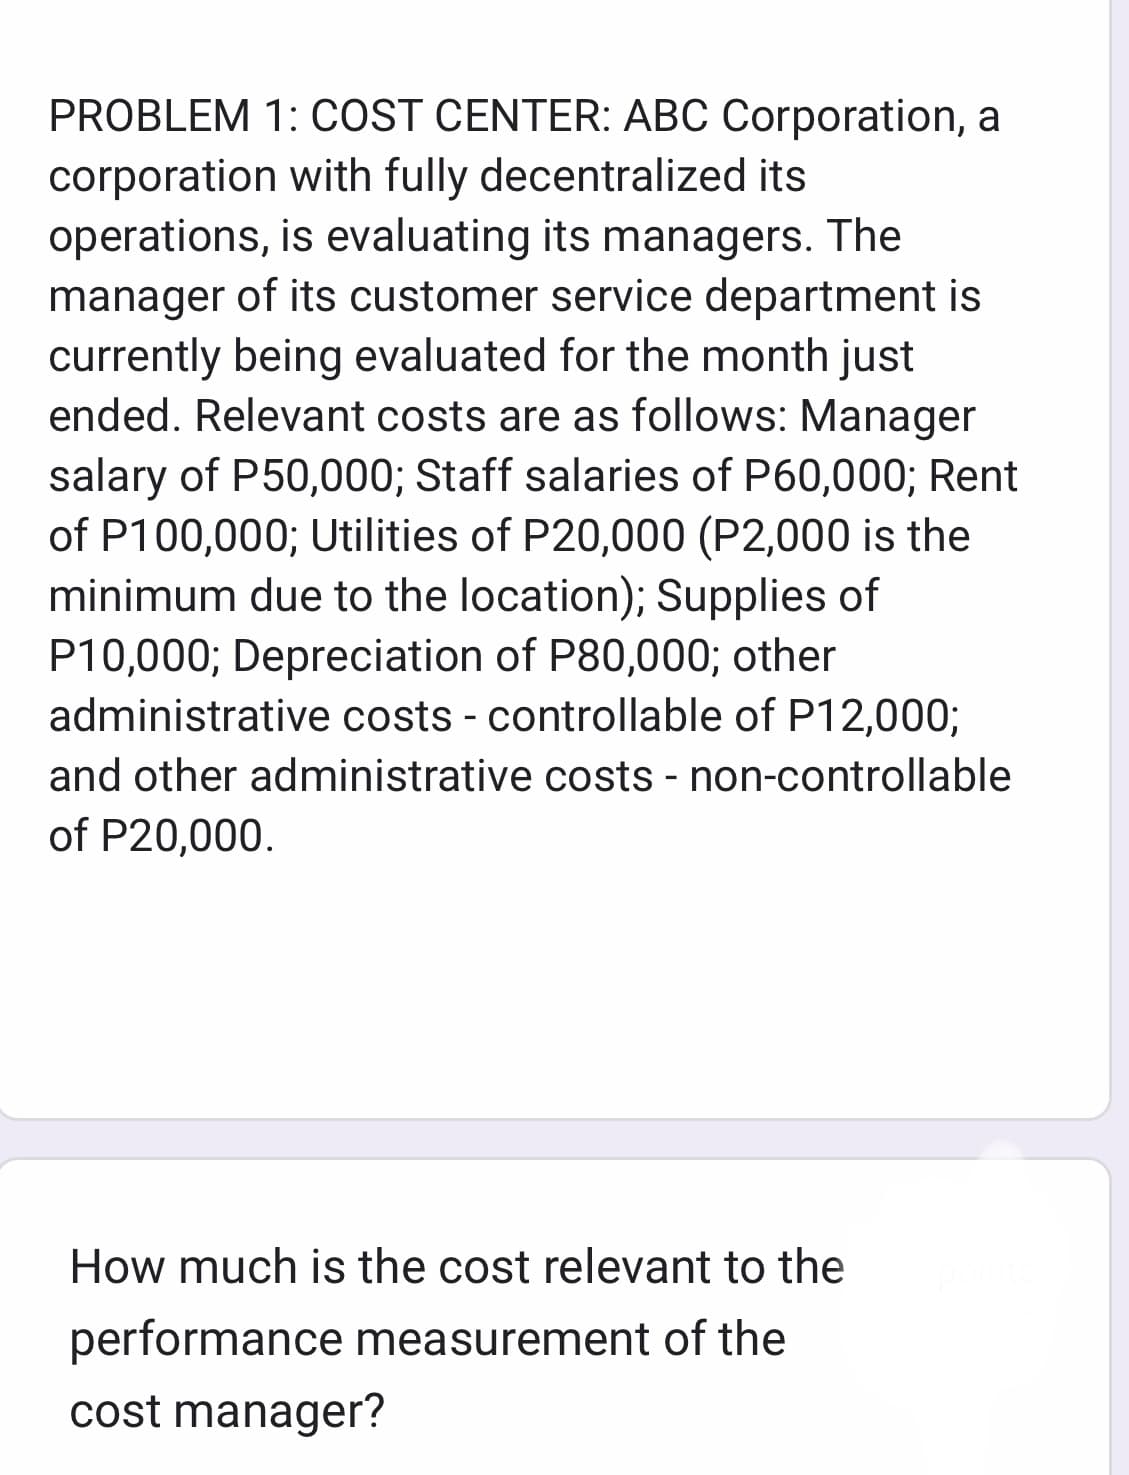 PROBLEM 1: COST CENTER: ABC Corporation, a
corporation with fully decentralized its
operations, is evaluating its managers. The
manager of its customer service department is
currently being evaluated for the month just
ended. Relevant costs are as follows: Manager
salary of P50,000; Staff salaries of P60,000; Rent
of P100,000; Utilities of P20,000 (P2,000 is the
minimum due to the location); Supplies of
P10,000; Depreciation of P80,000; other
administrative costs - controllable of P12,000;
and other administrative costs - non-controllable
of P20,000.
How much is the cost relevant to the
performance measurement of the
cost manager?